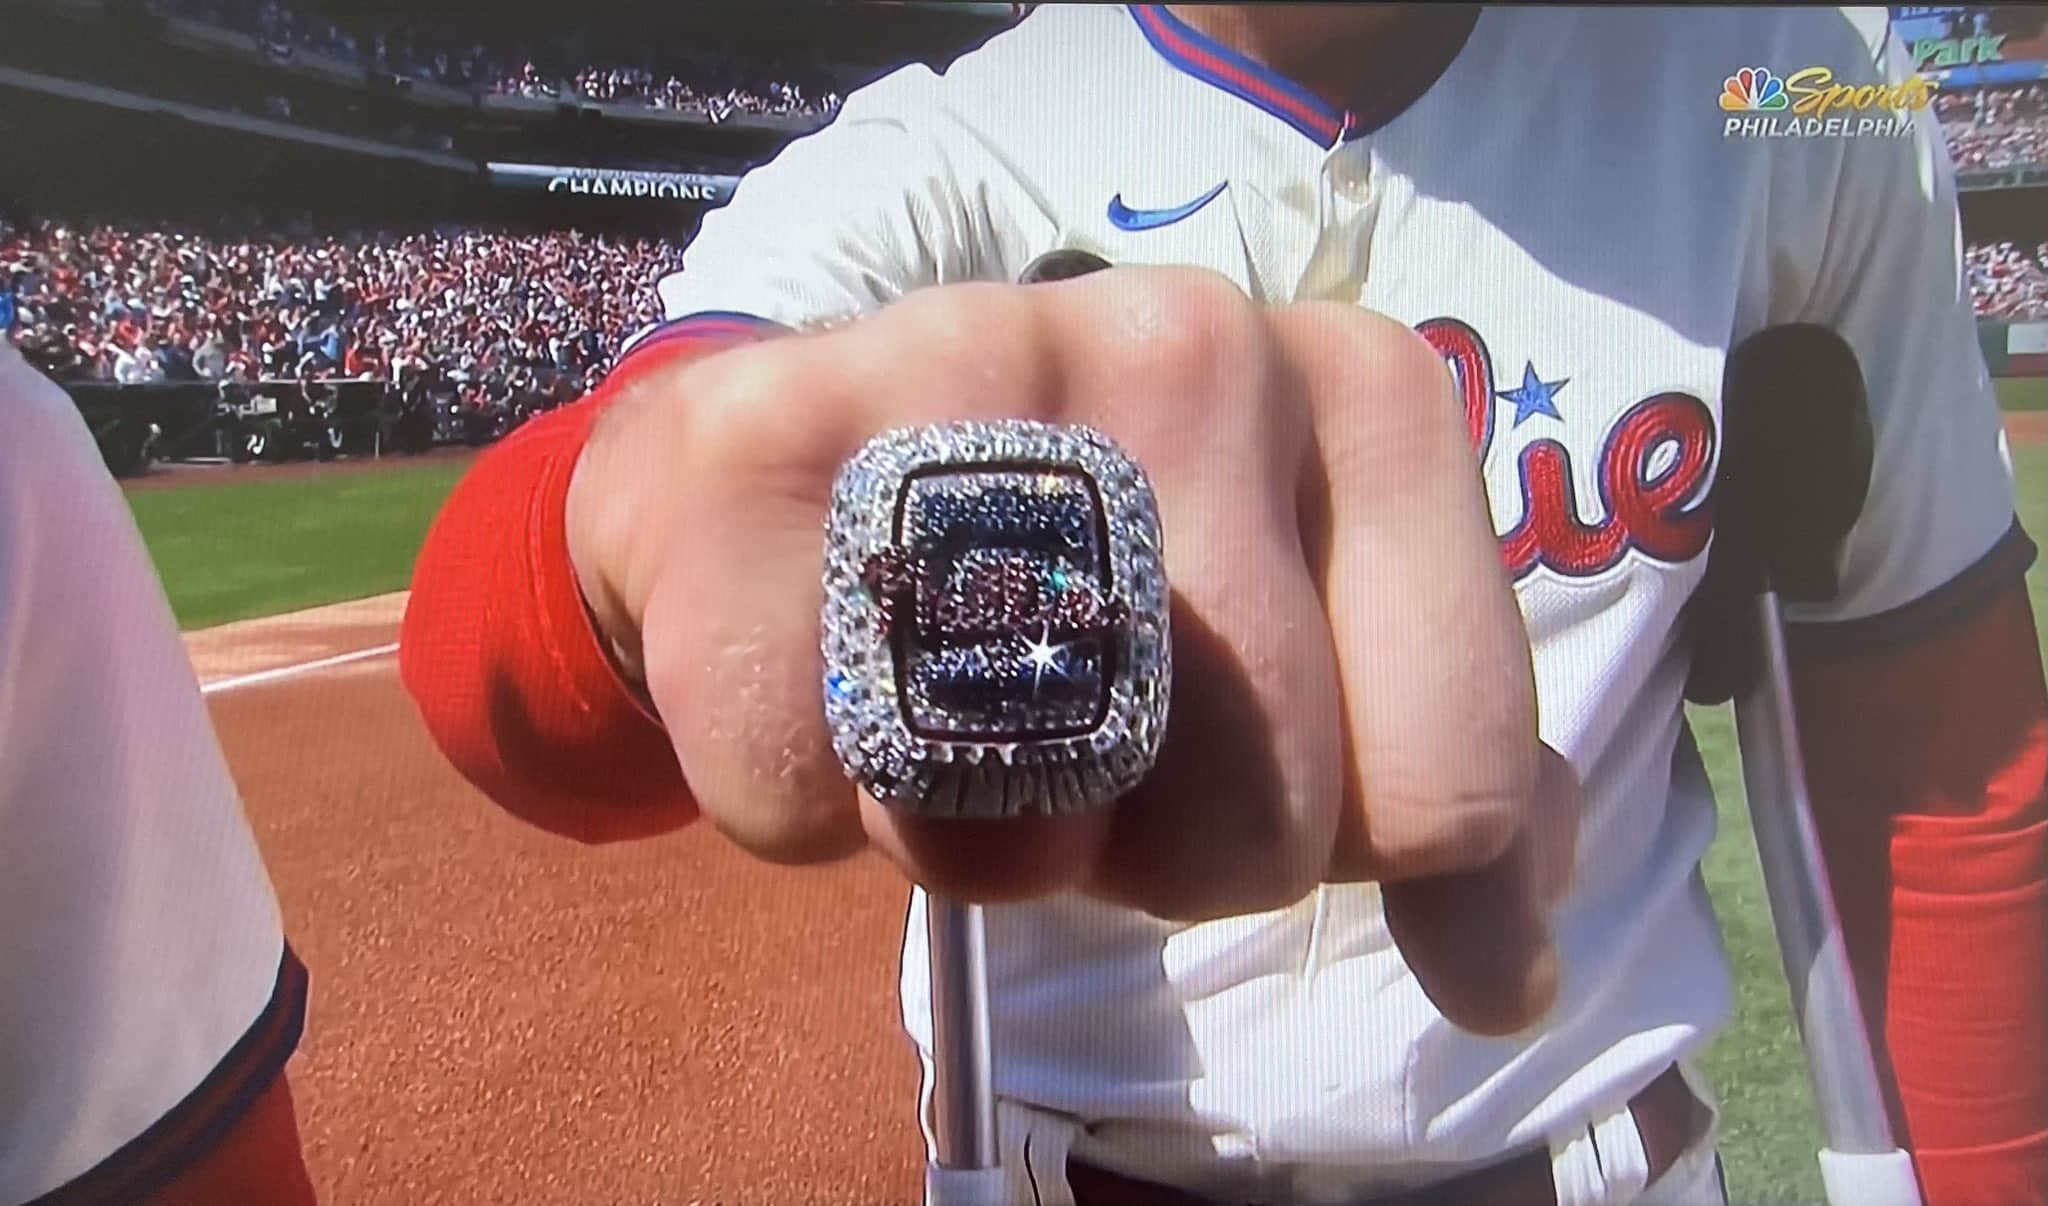 An Addendum to the Totally Innocuous Phillies Ring Post